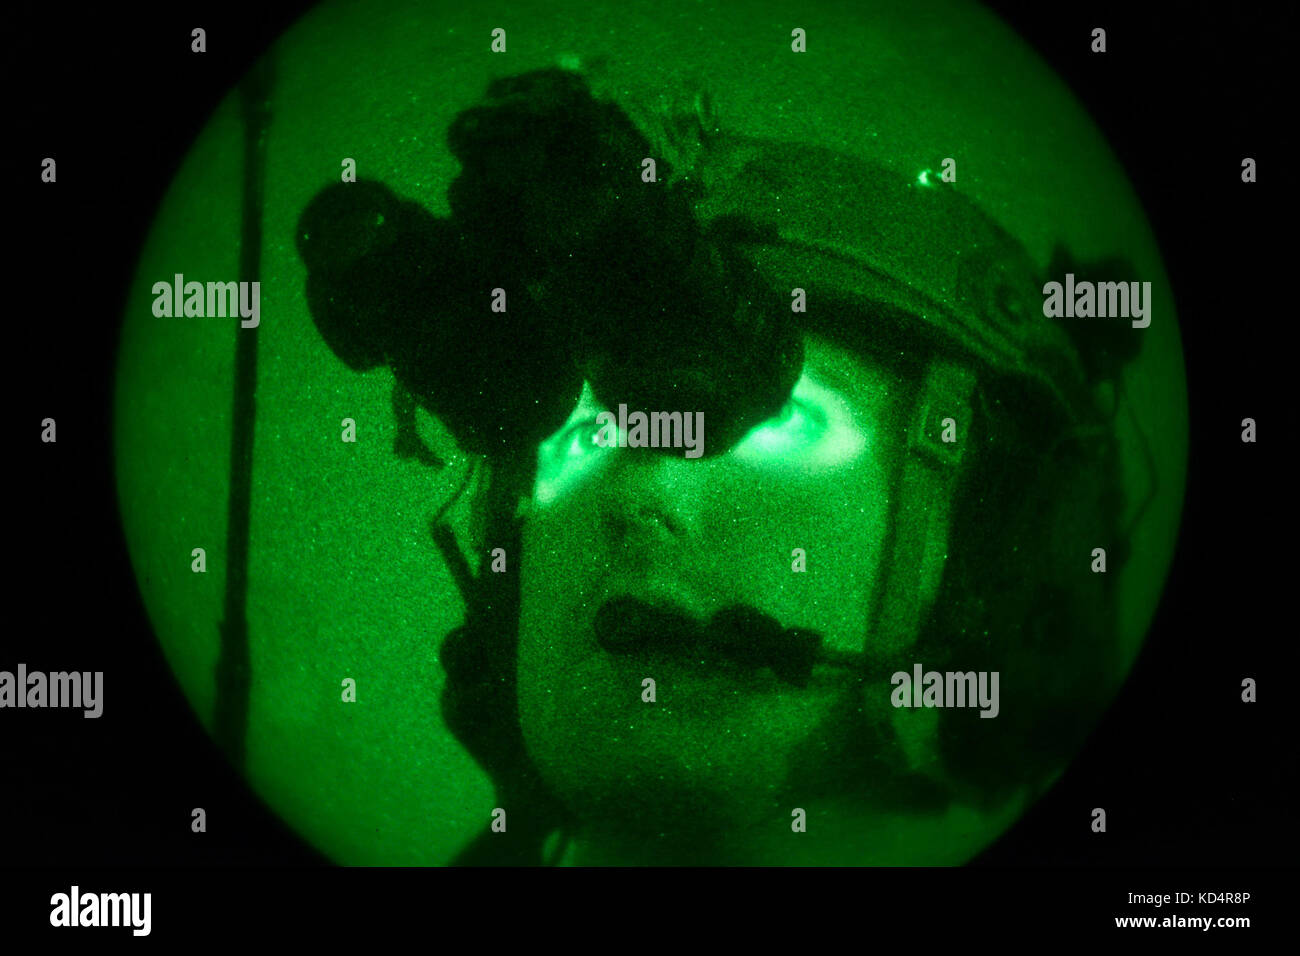 A U.S. Air Force Joint Terminal Attack Controller assigned to the 22nd Special Tactics Squadron looks through his night vision as he conducts close air support operations at Poinsett Electronic Combat Range on Shaw Air Force Base, S.C., May 21, 2014.  Elements of the South Carolina Army and Air National Guard, U.S. Army and U.S. Air Force special operations, and Columbia Police Department S.W.A.T., conducted nighttime training, which allowed special operations forces and the National Guard to conduct joint urban assault training. (U.S. Air National Guard photo by Tech. Sgt. Jorge Intriago/Rele Stock Photo